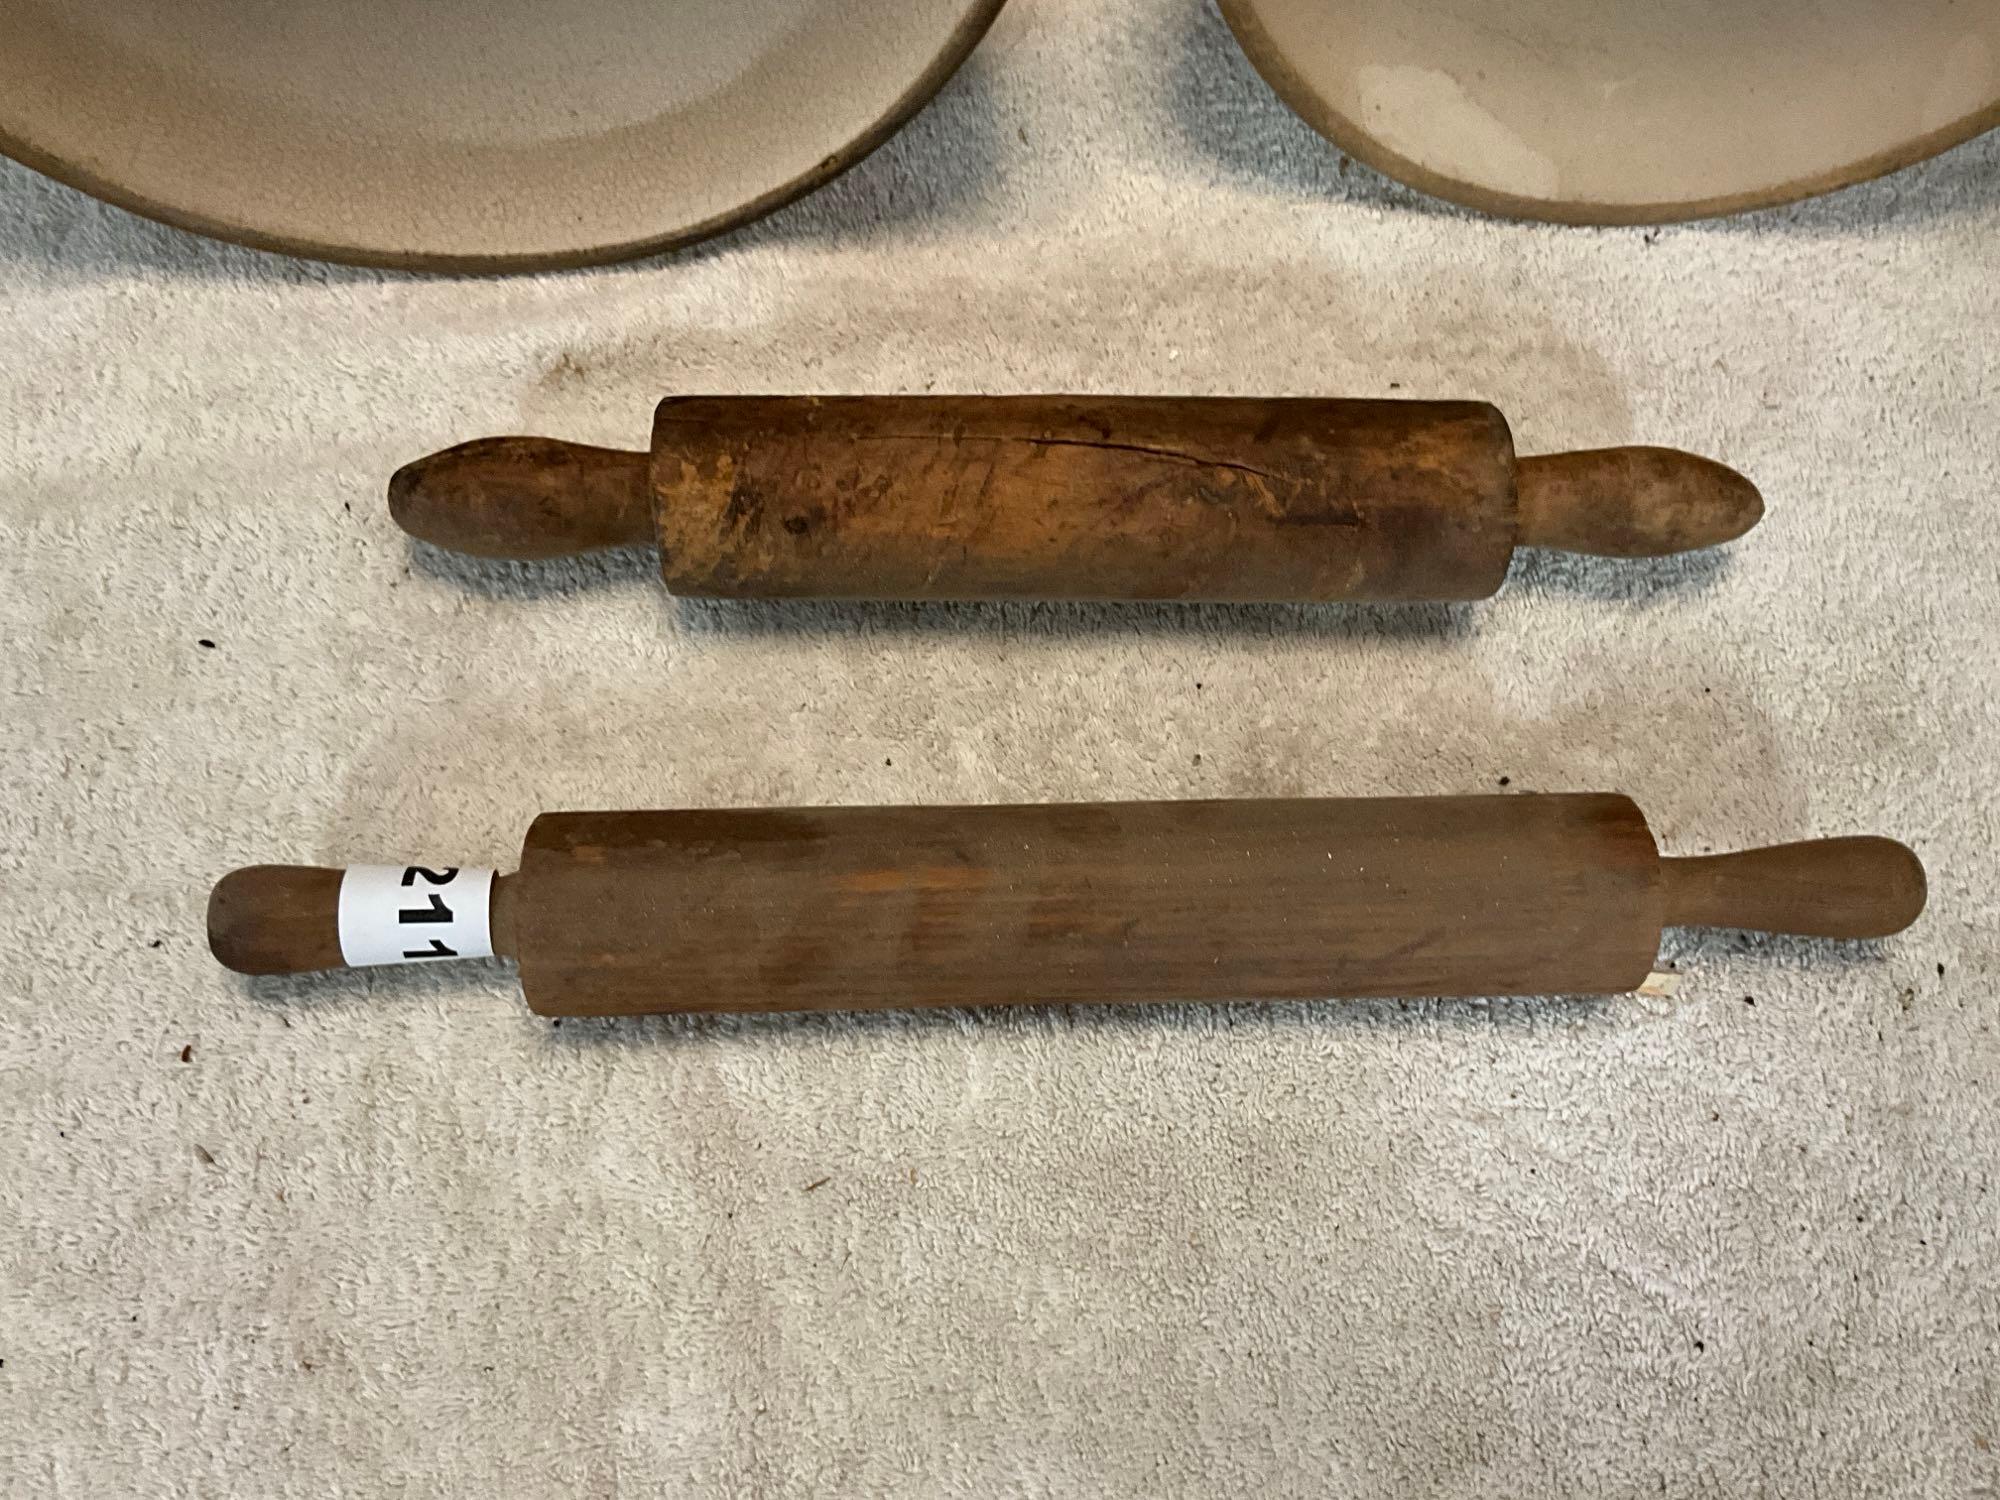 pair of nested stoneware mixing bowls & (2) wooden rolling pins